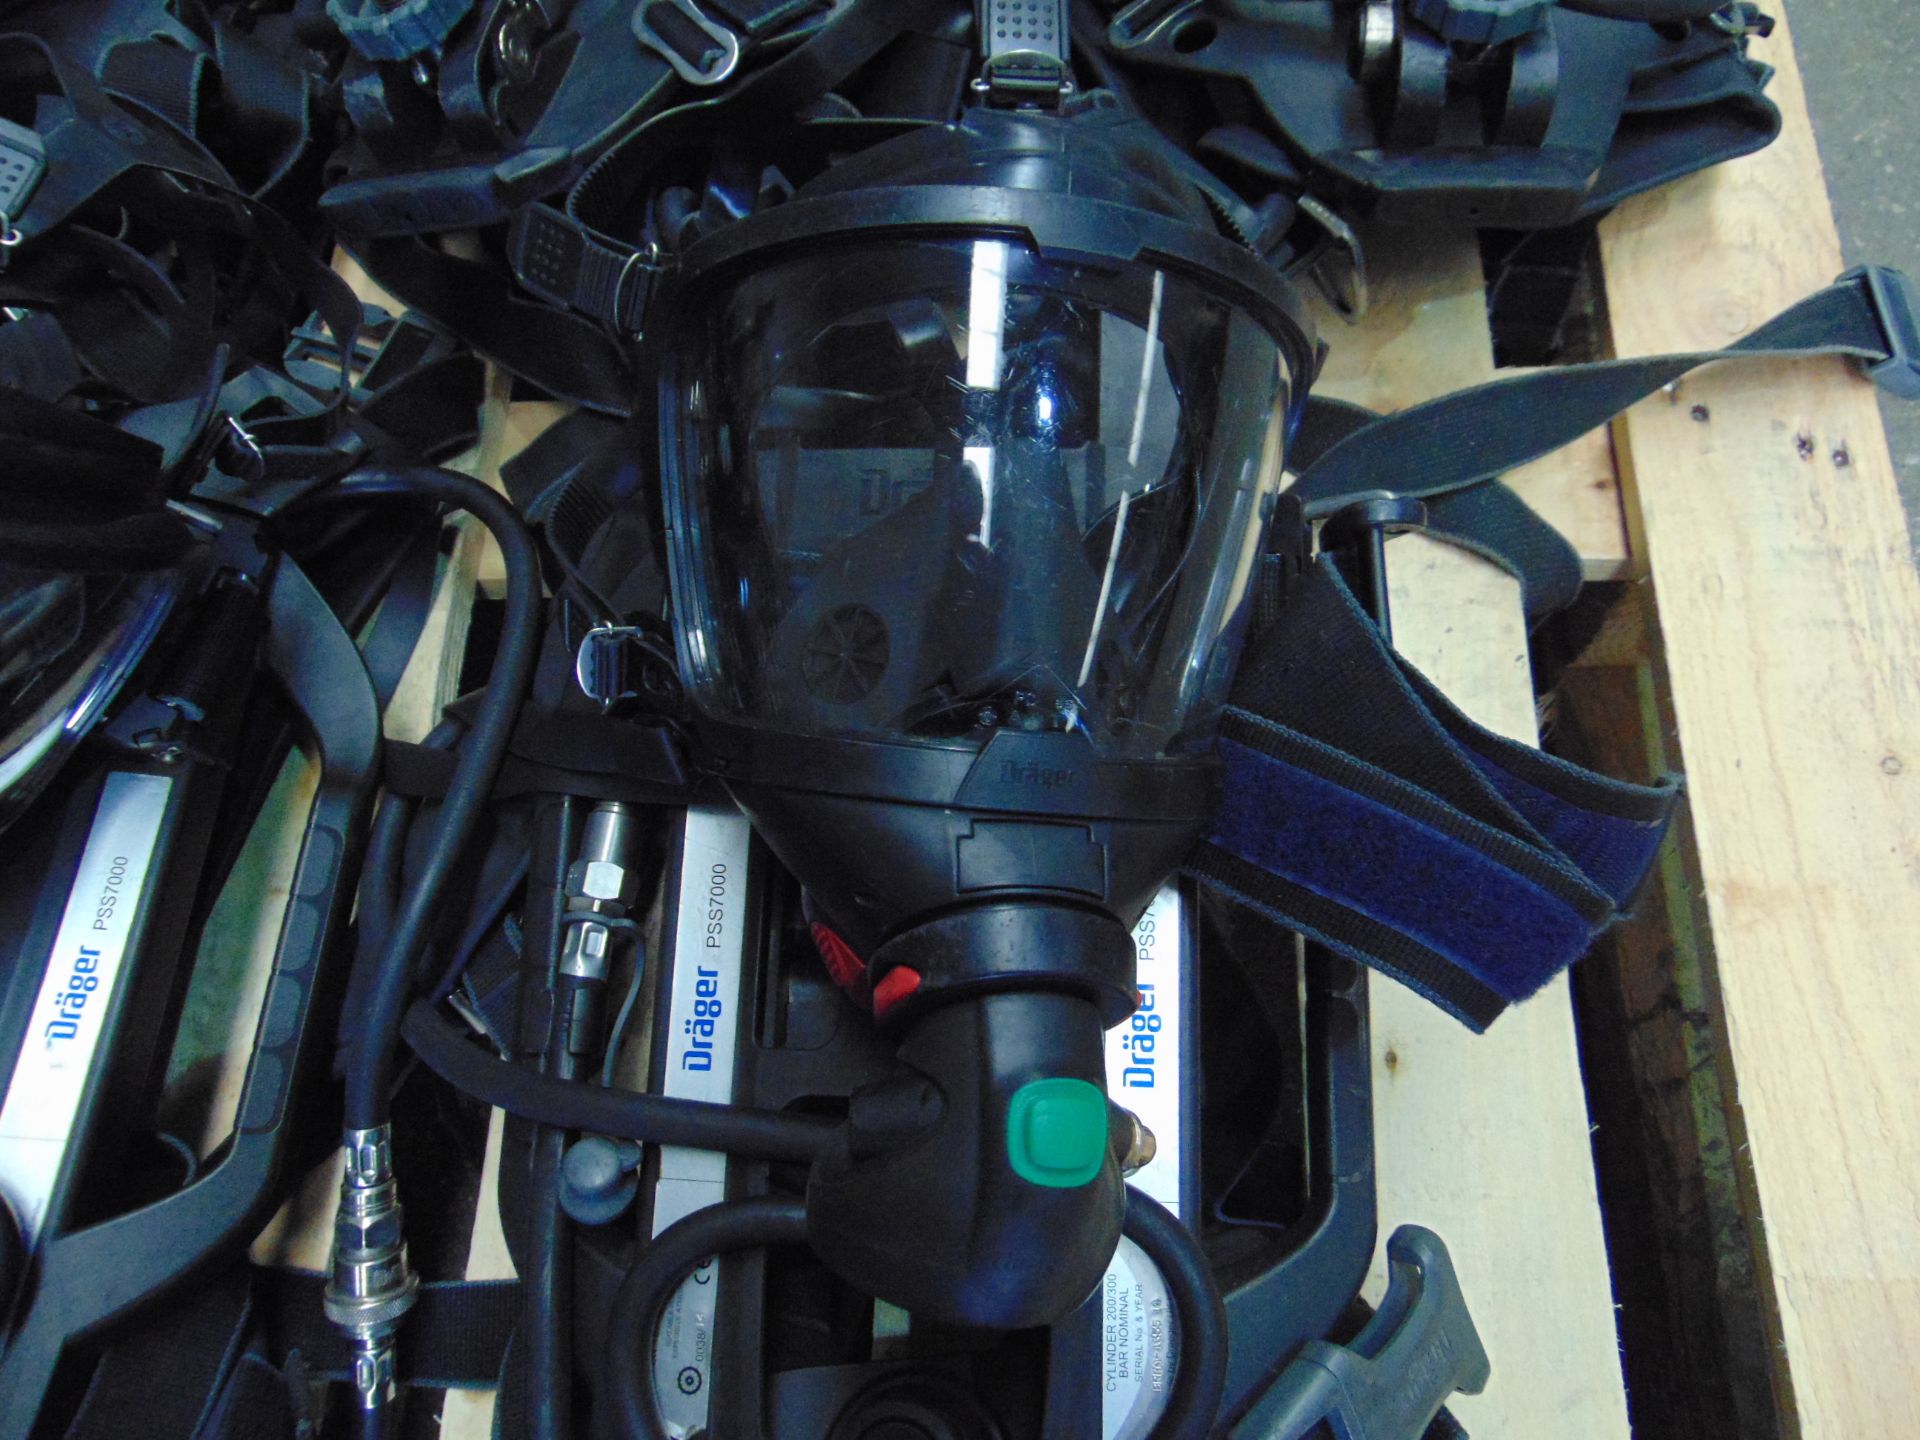 5 x Drager PSS 7000 Self Contained Breathing Apparatus w/ 10 x Drager 300 Bar Air Cylinders - Image 11 of 22